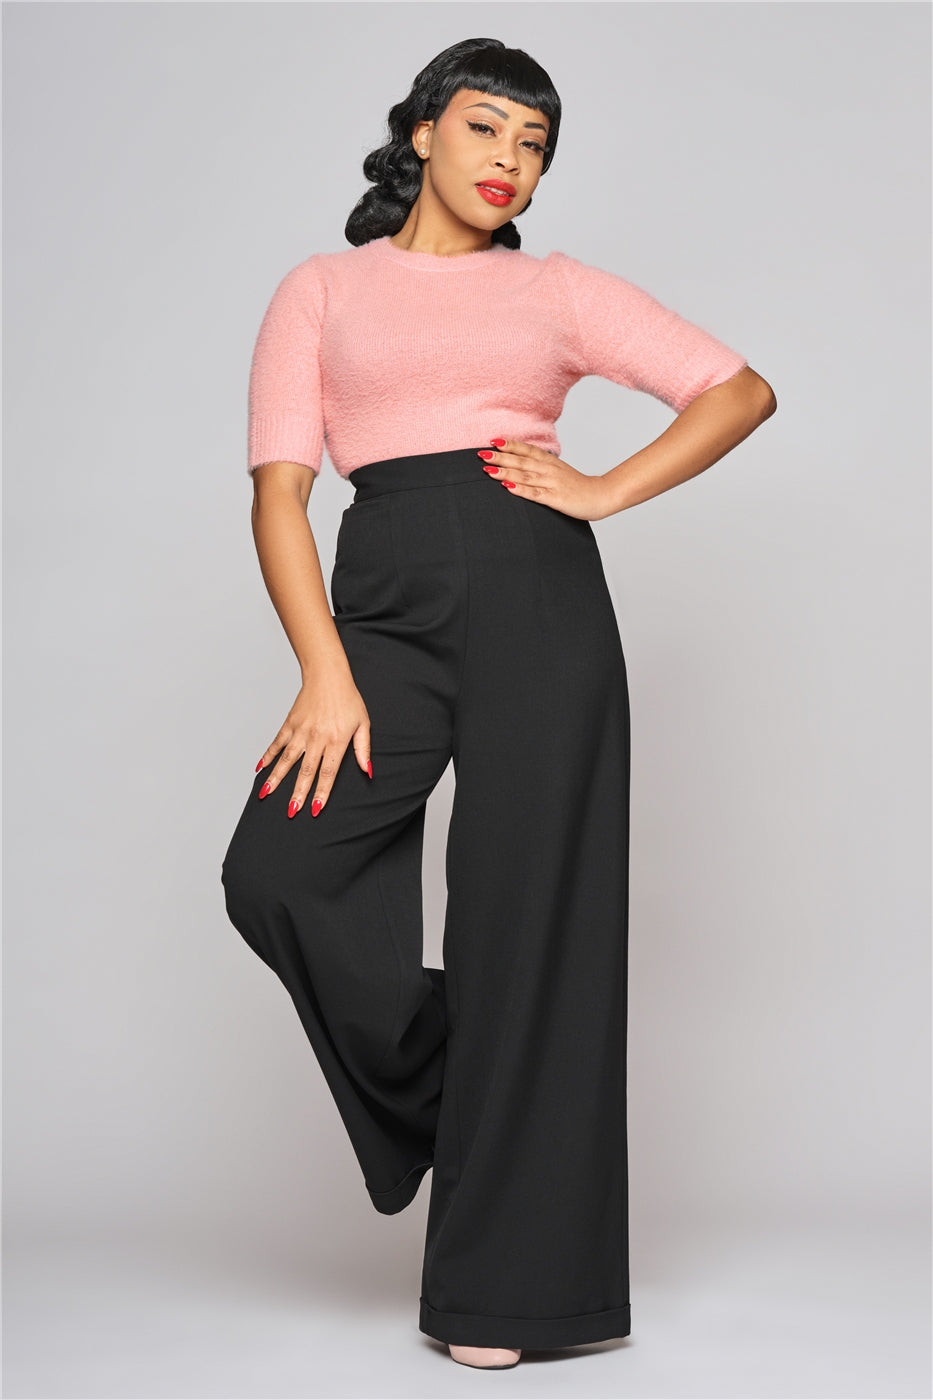 Tall slim woman with red lipstick and nails standing with her hand on her hip and one knee raised wearing the pink Chrissie top and black wide leg trousers